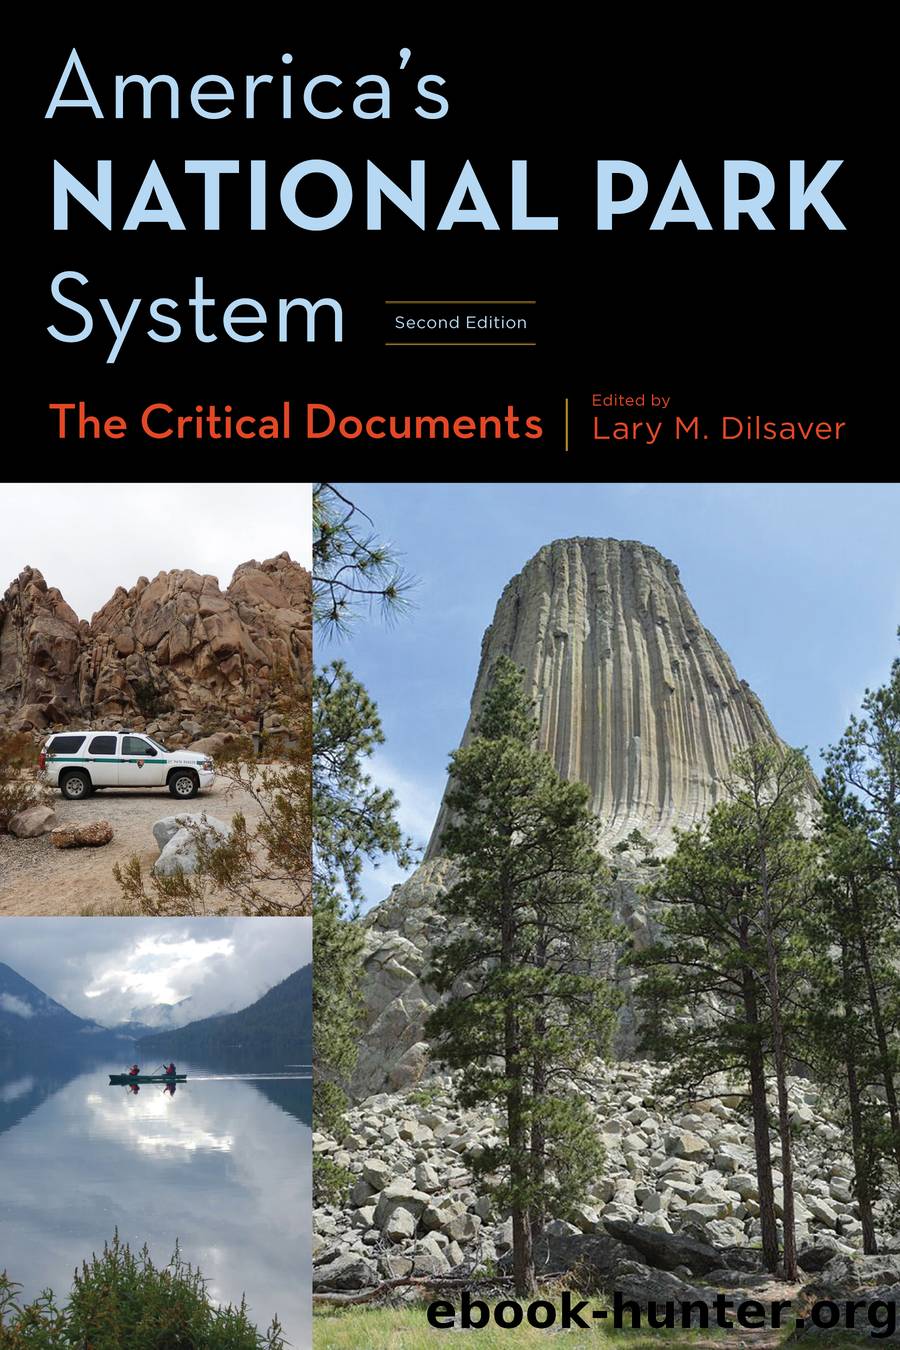 America's National Park System by Lary M. Dilsaver